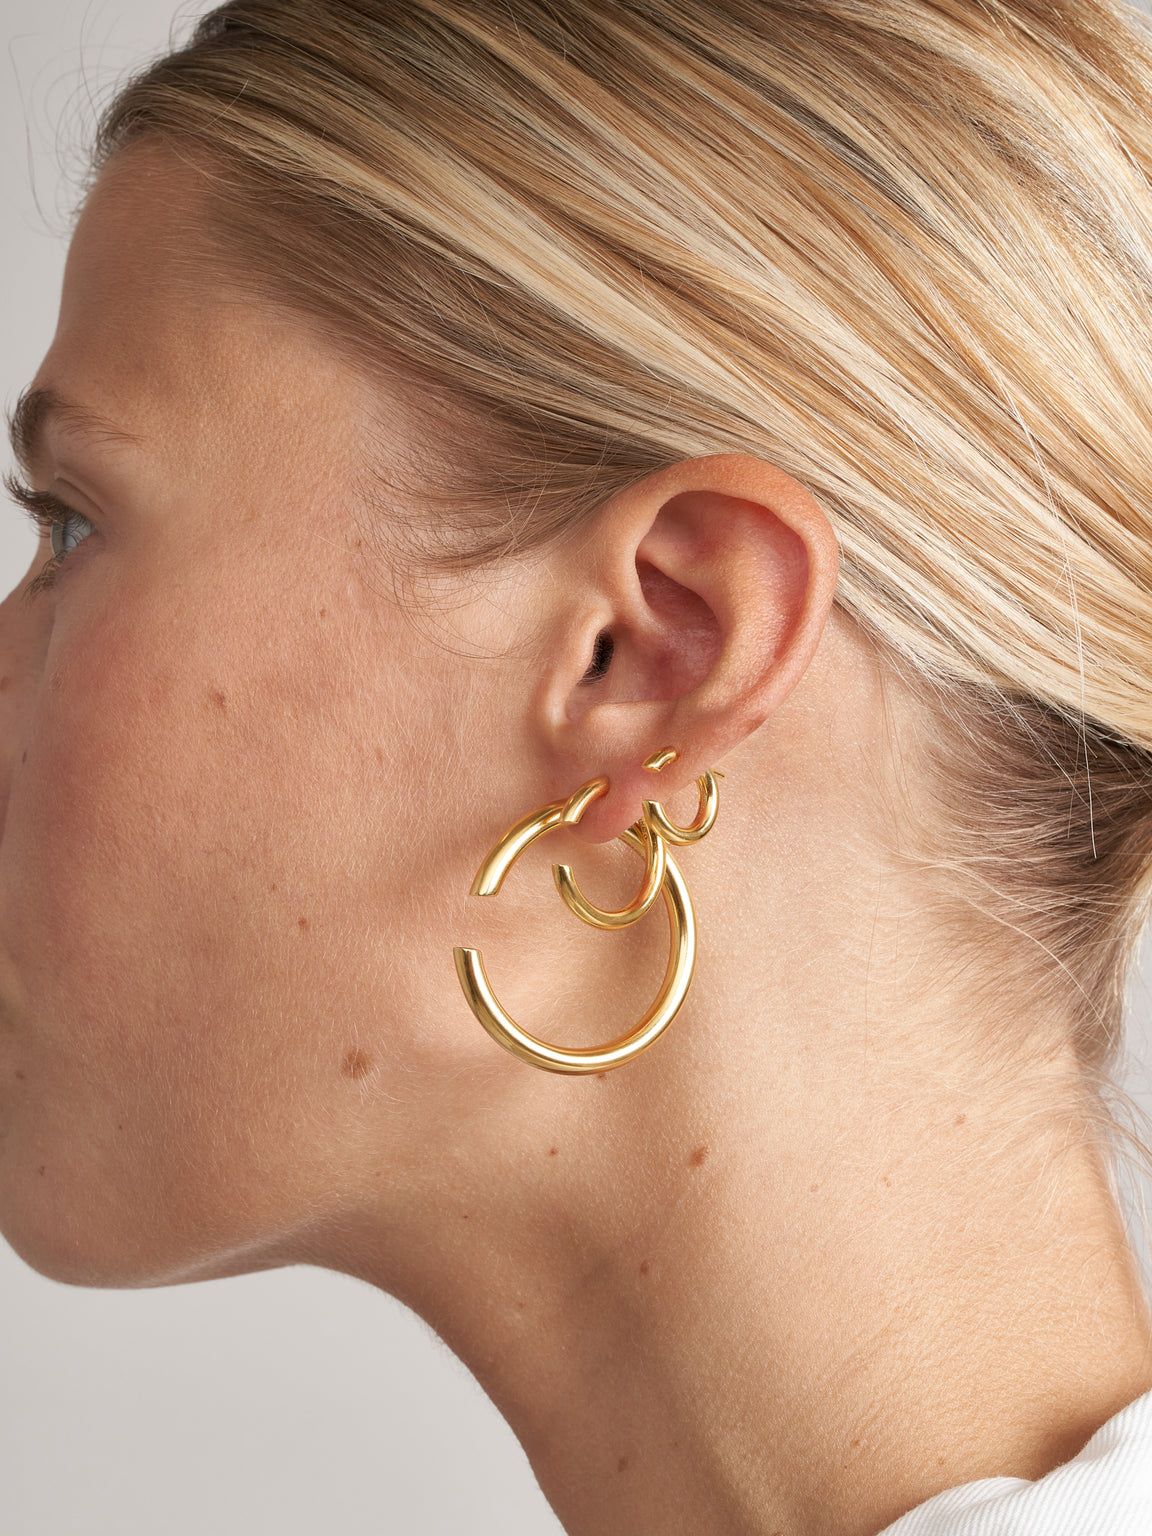 MARIA BLACK | DISRUPTED 40 EARRING GOLD1